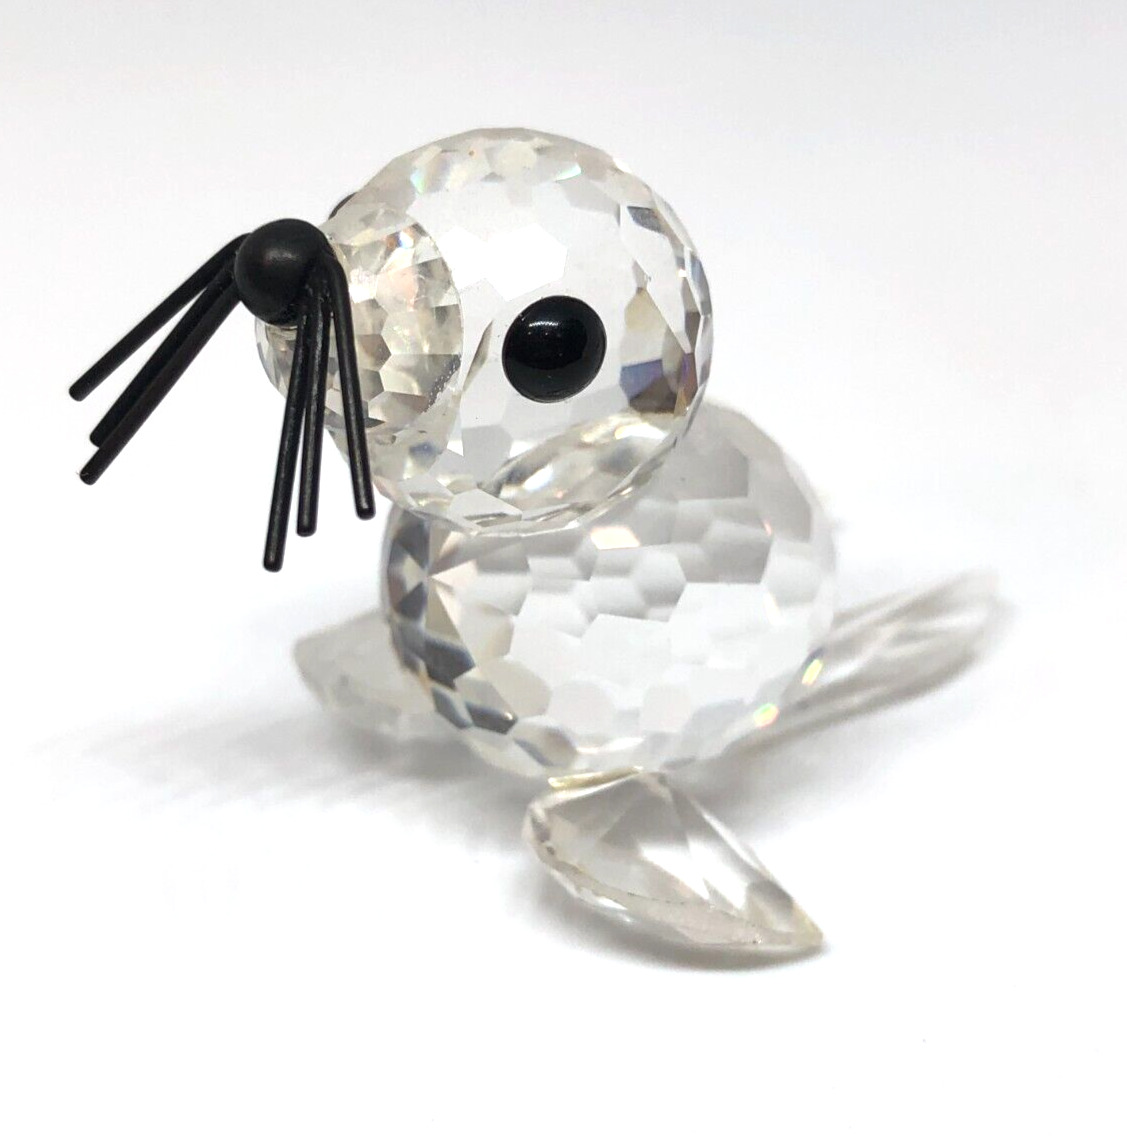 Swarovski Crystal Baby Seal Black Whiskers from Kingdom of Ice & Snow